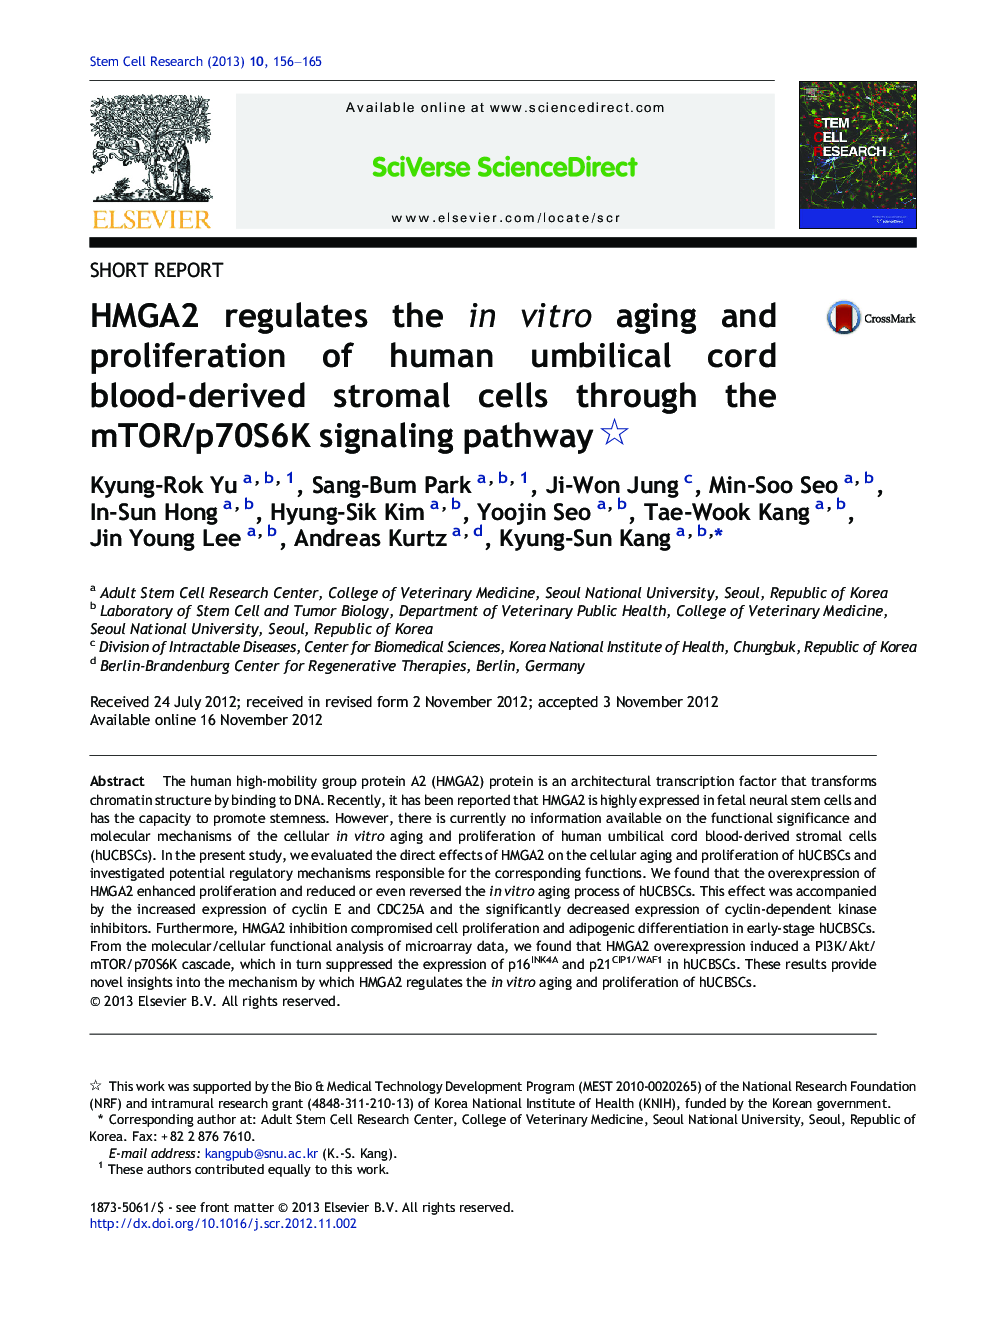 HMGA2 regulates the in vitro aging and proliferation of human umbilical cord blood-derived stromal cells through the mTOR/p70S6K signaling pathway